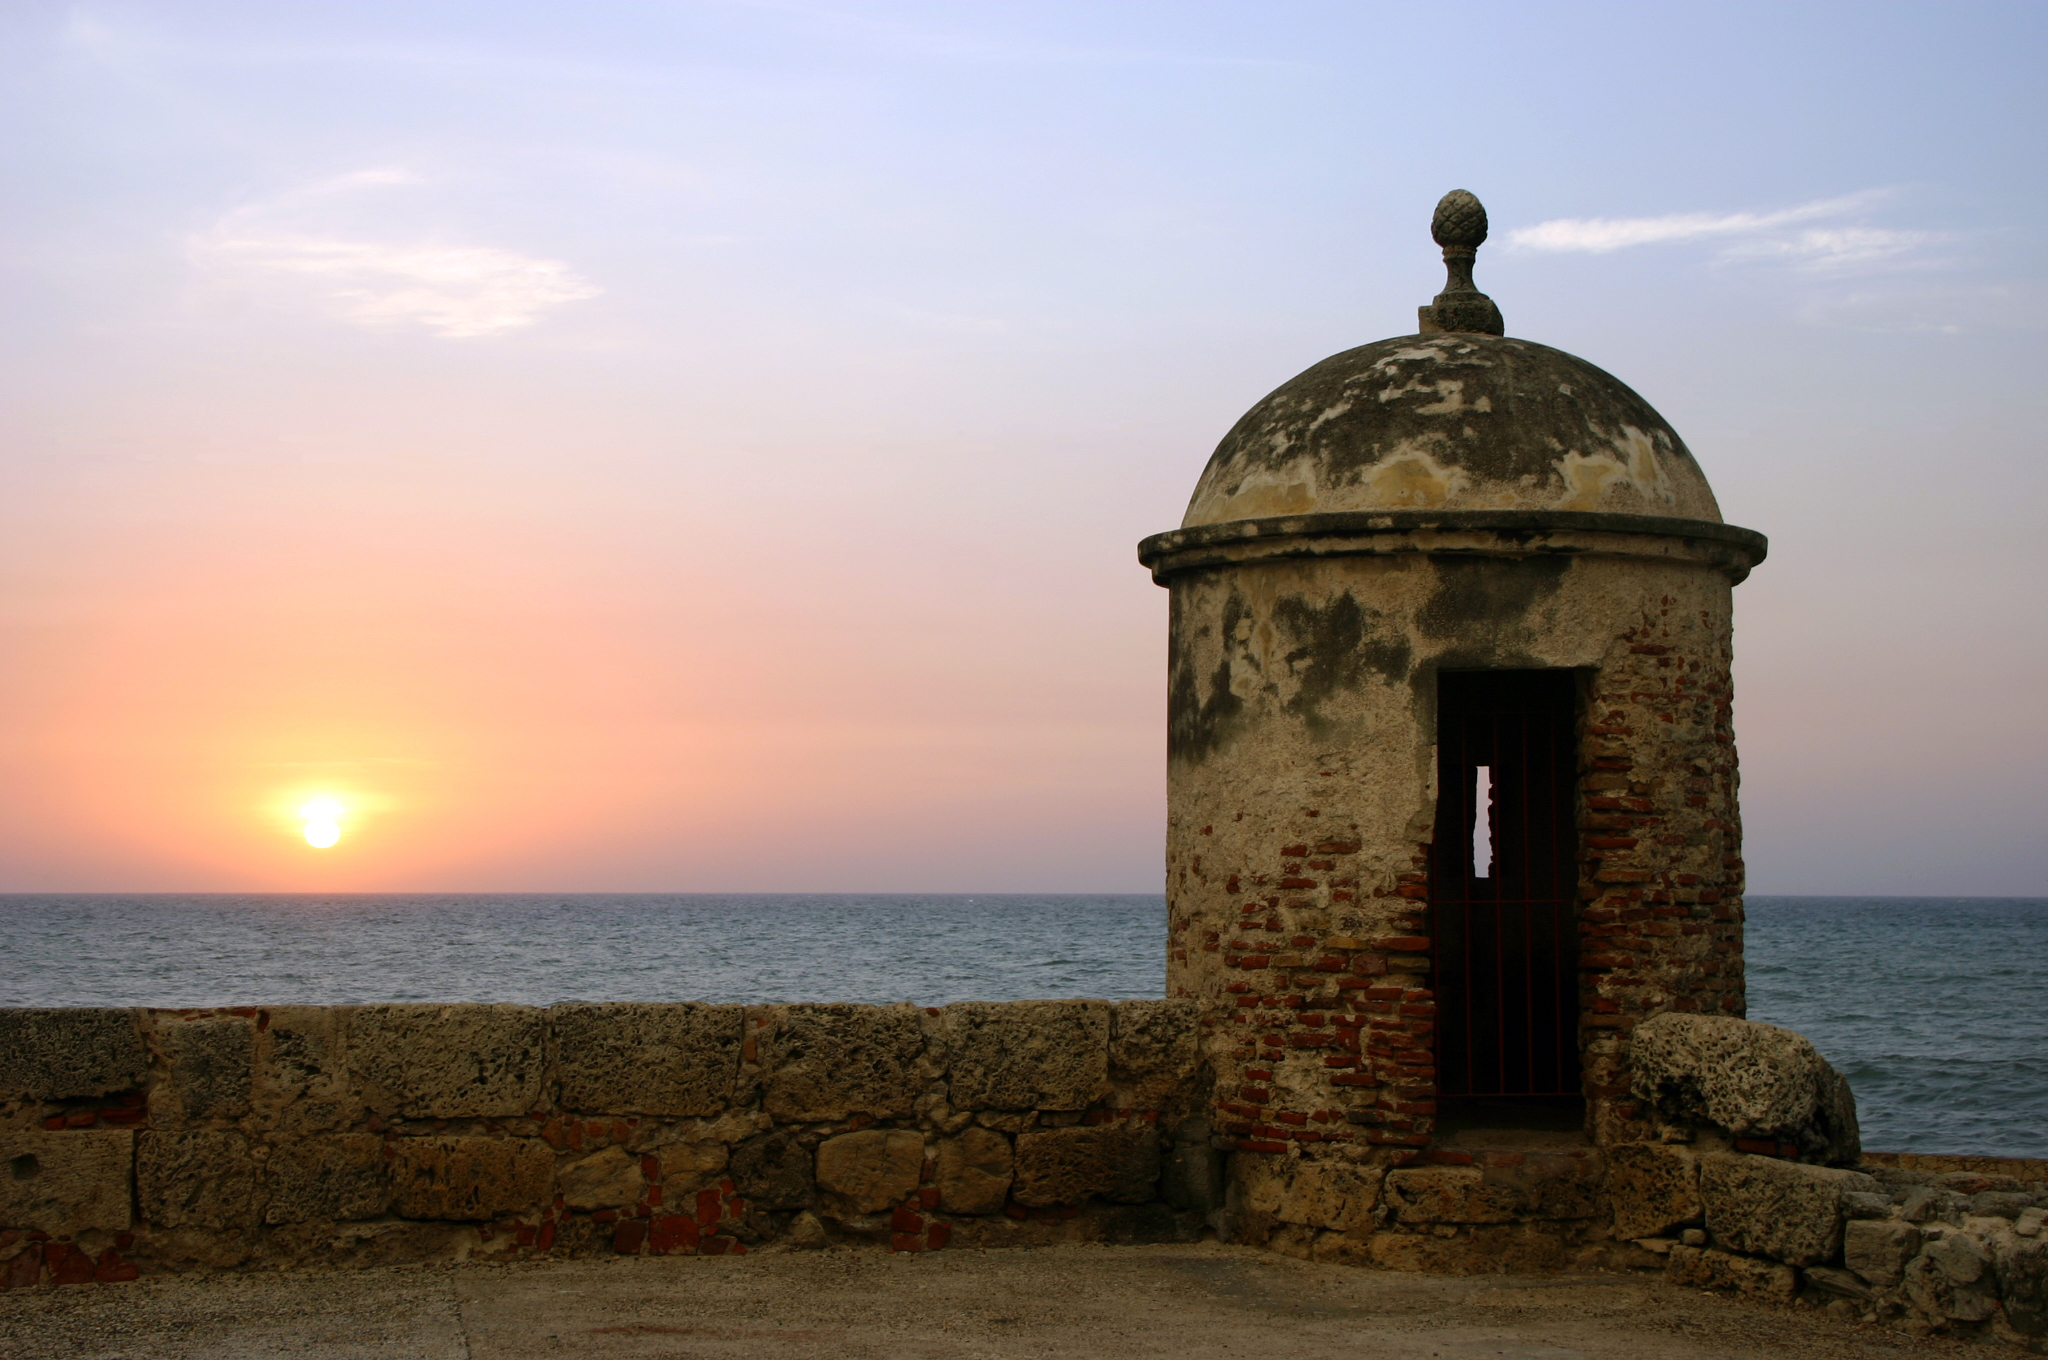 High Resolution Image Sunset In Cartagena Colombia 1920x1080p HD